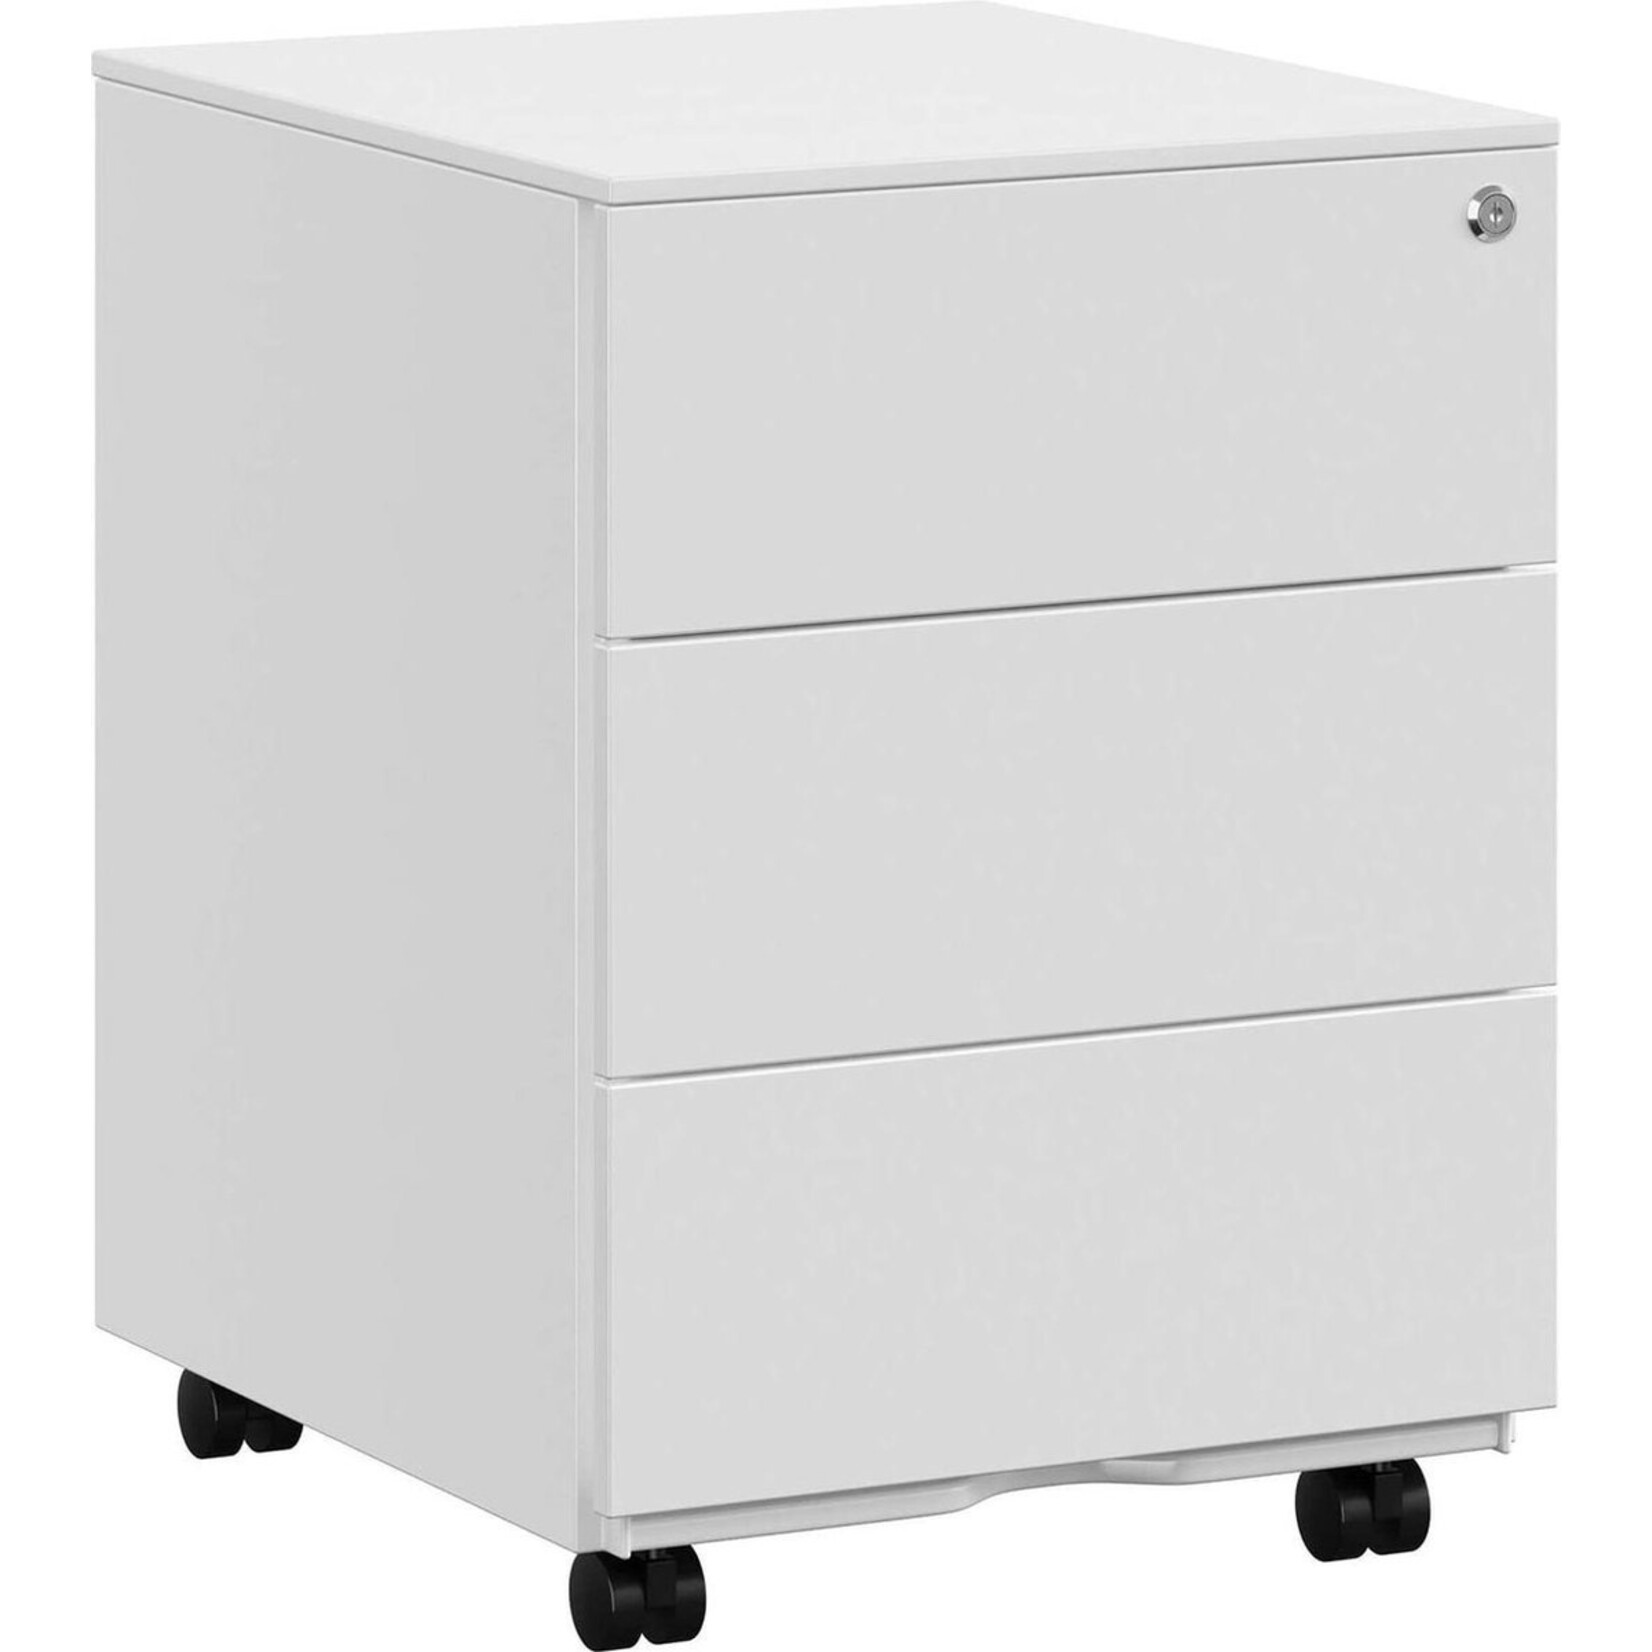 Bobbel Home Roll container - With 3 drawers - Pre-assembled - White